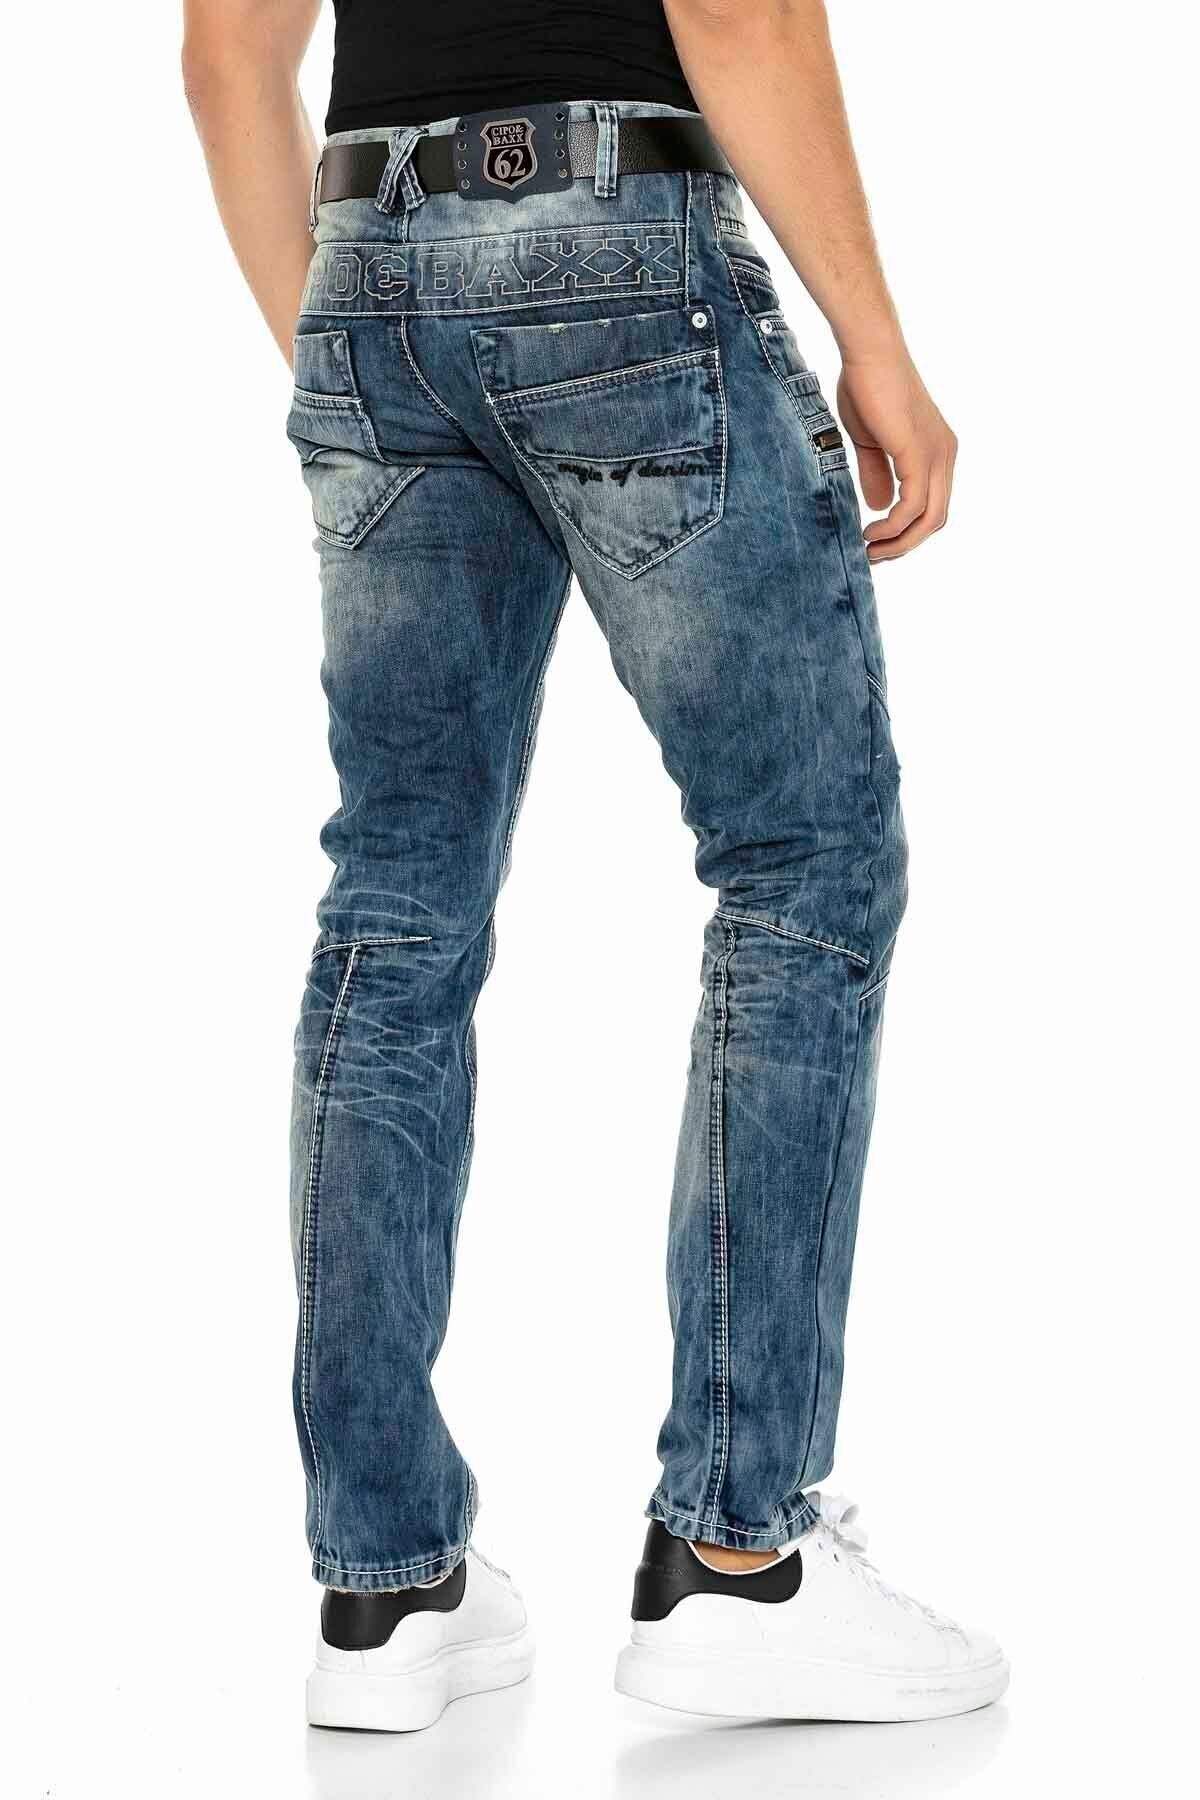 C-1178 Comfortable jeans in casual biker style